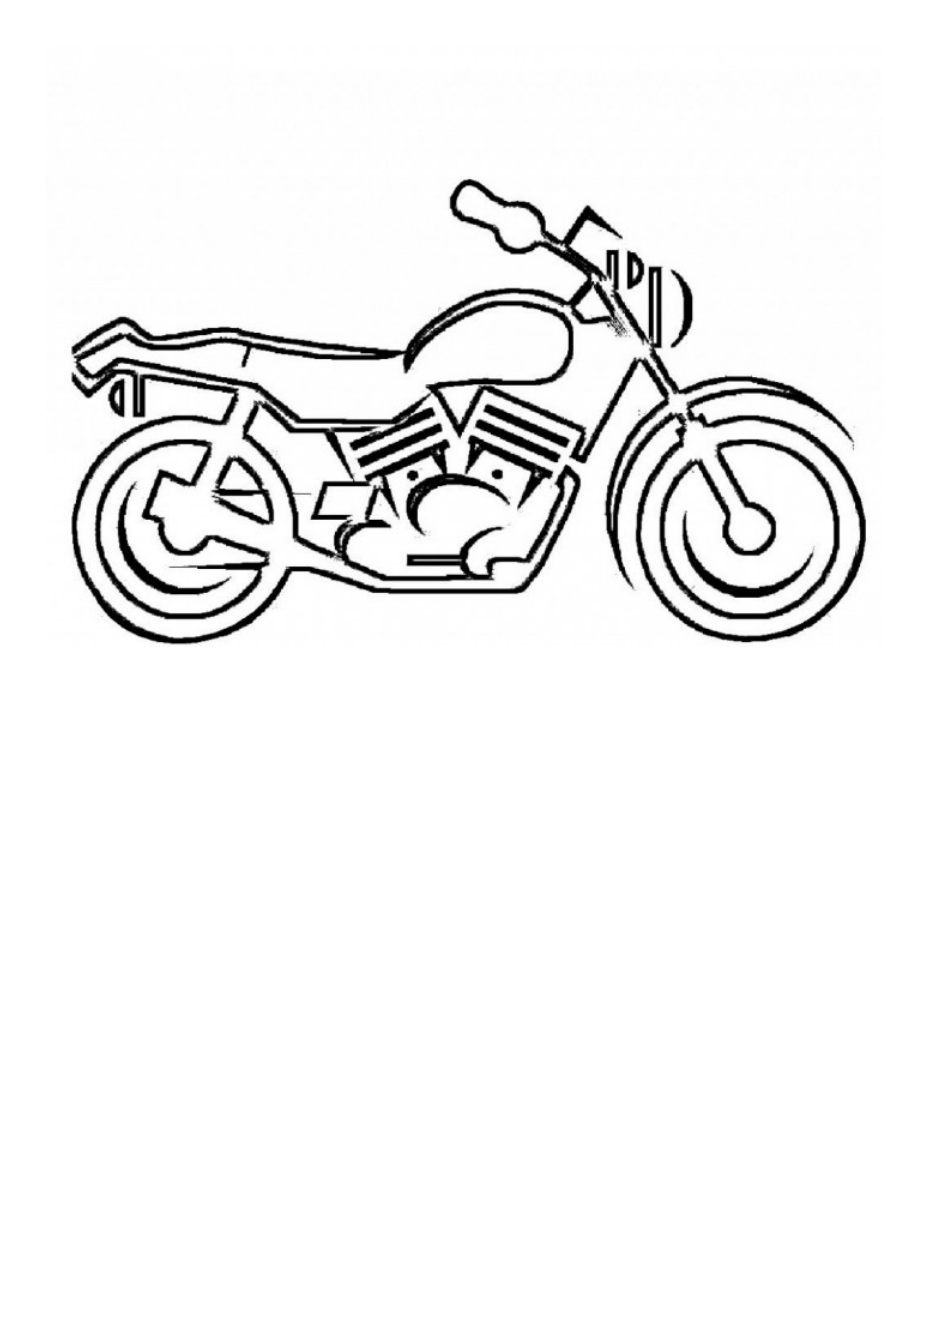 Motorcycle Coloring Page Image Preview